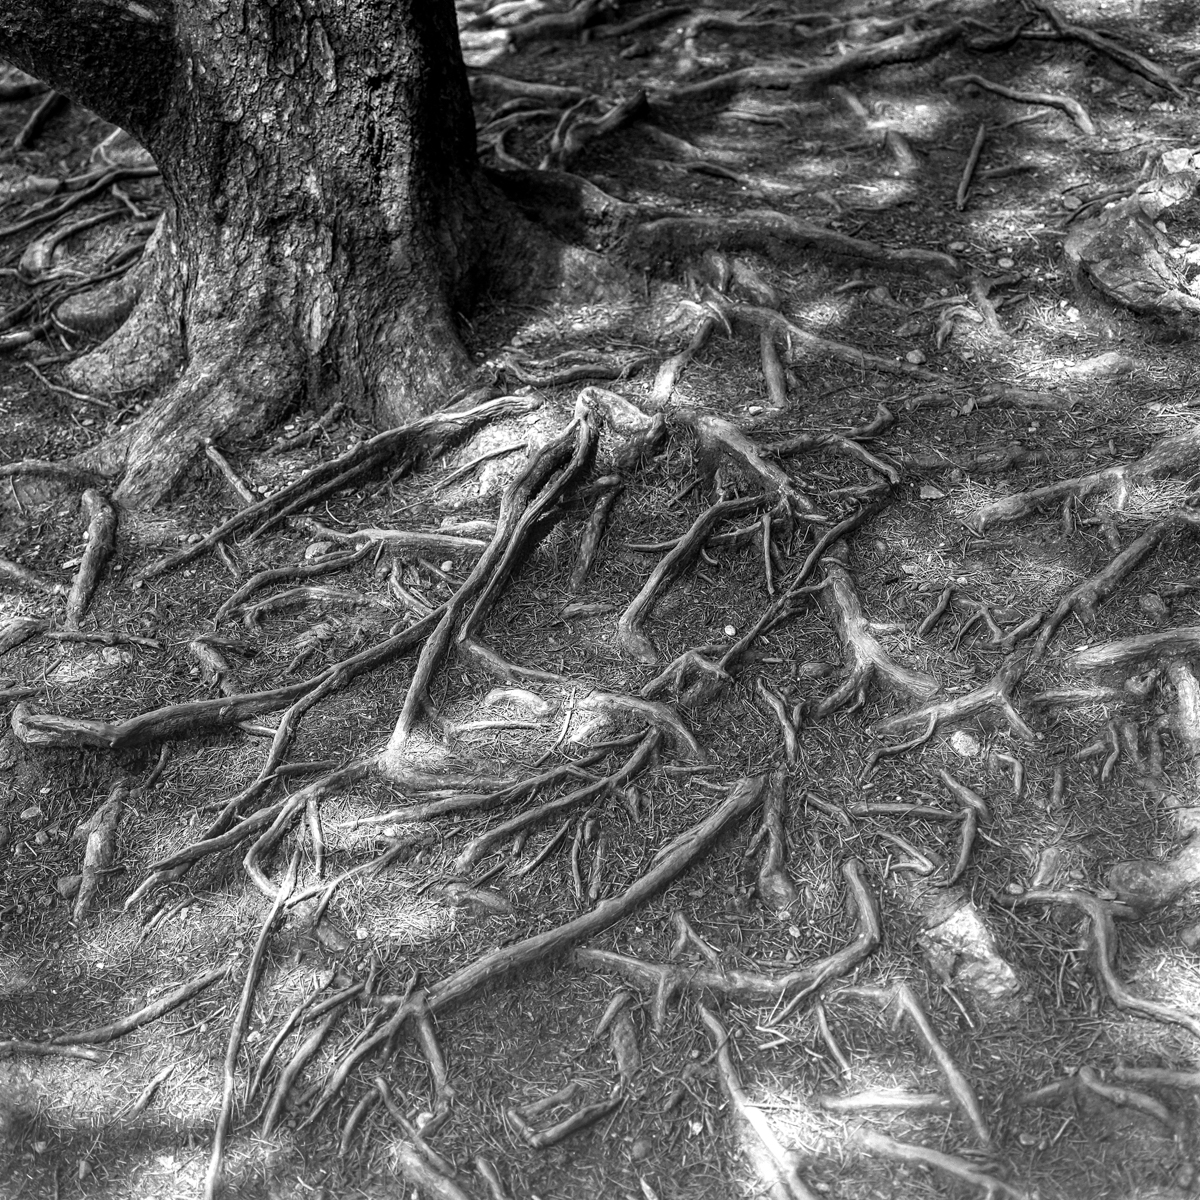 Black and white image of a trees roots coming out of the ground